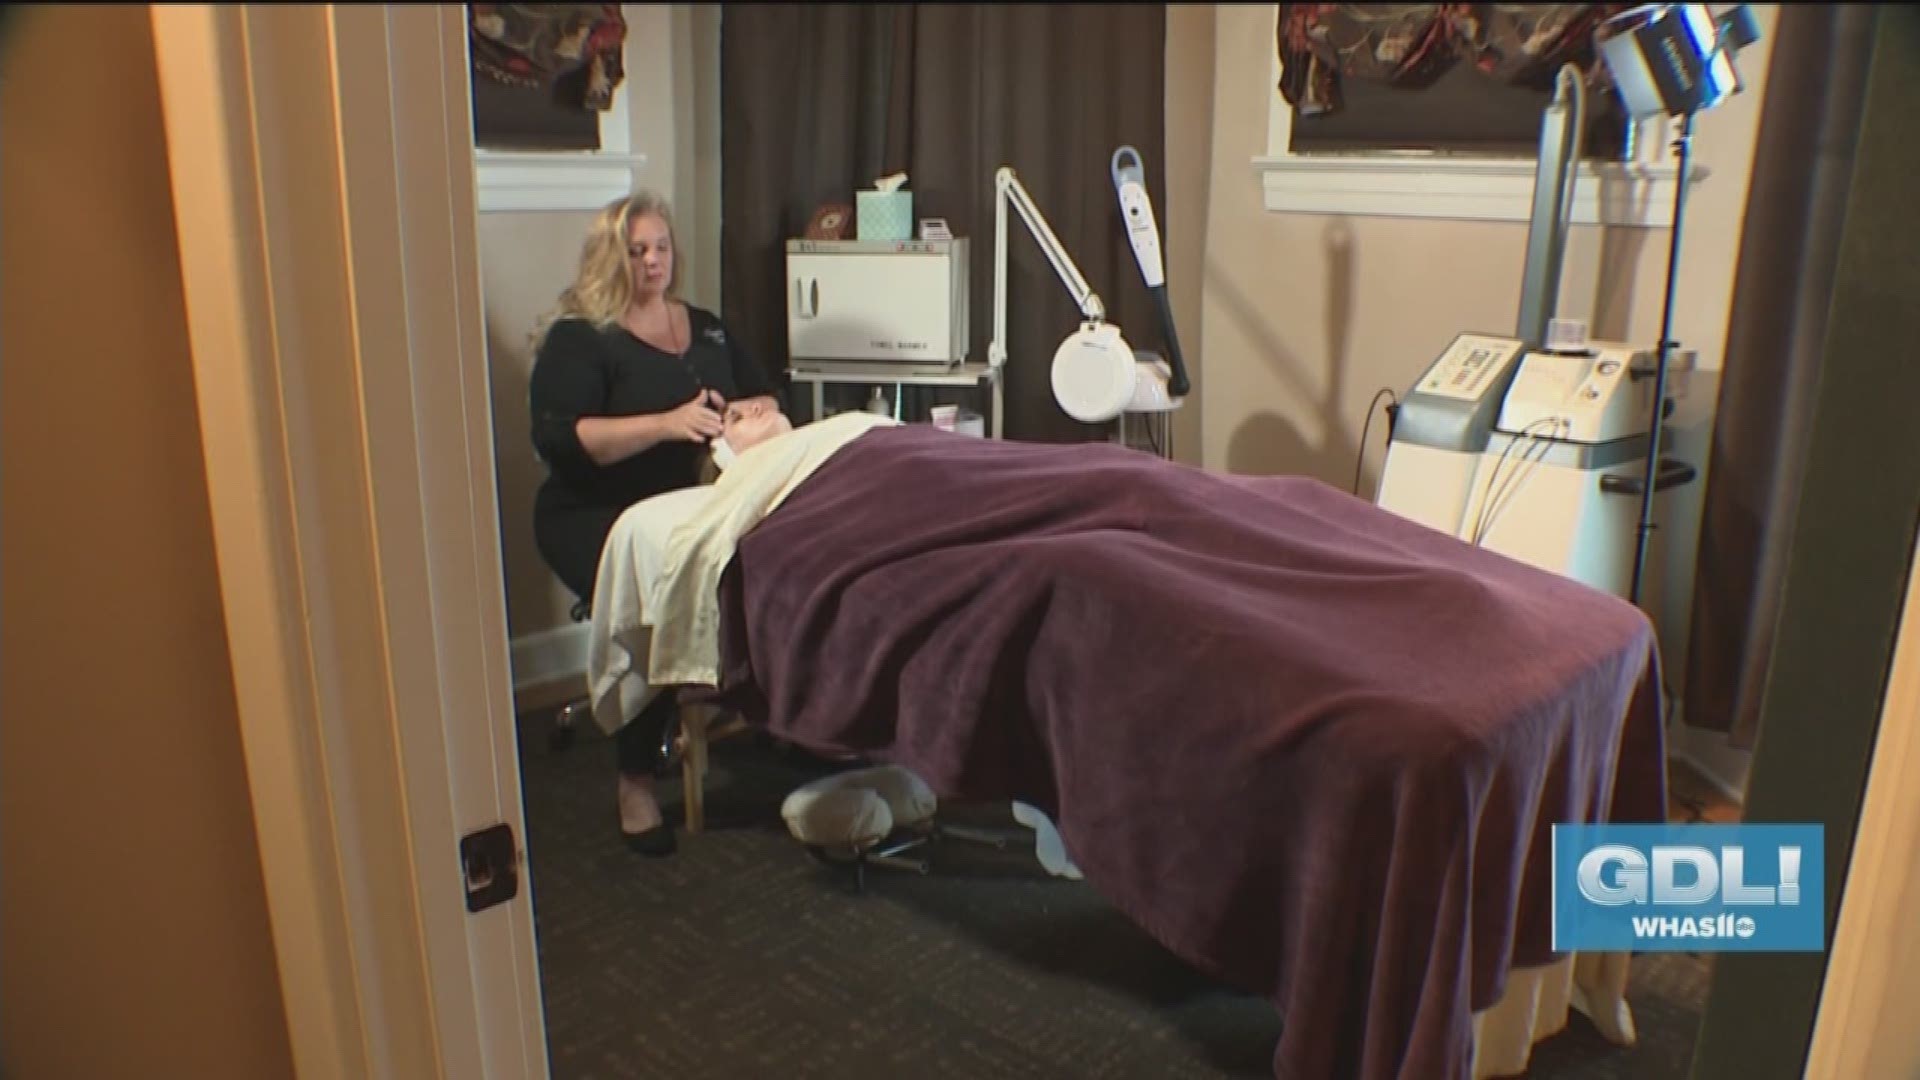 Serenity Spa is offering a special Passport to Serenity for Great Day Live viewers. Go to LouisvilleDaySpa.com or call 502-245-6484 for more information. Serenity Spa is located at 11614 Main Street in Middletown, KY.